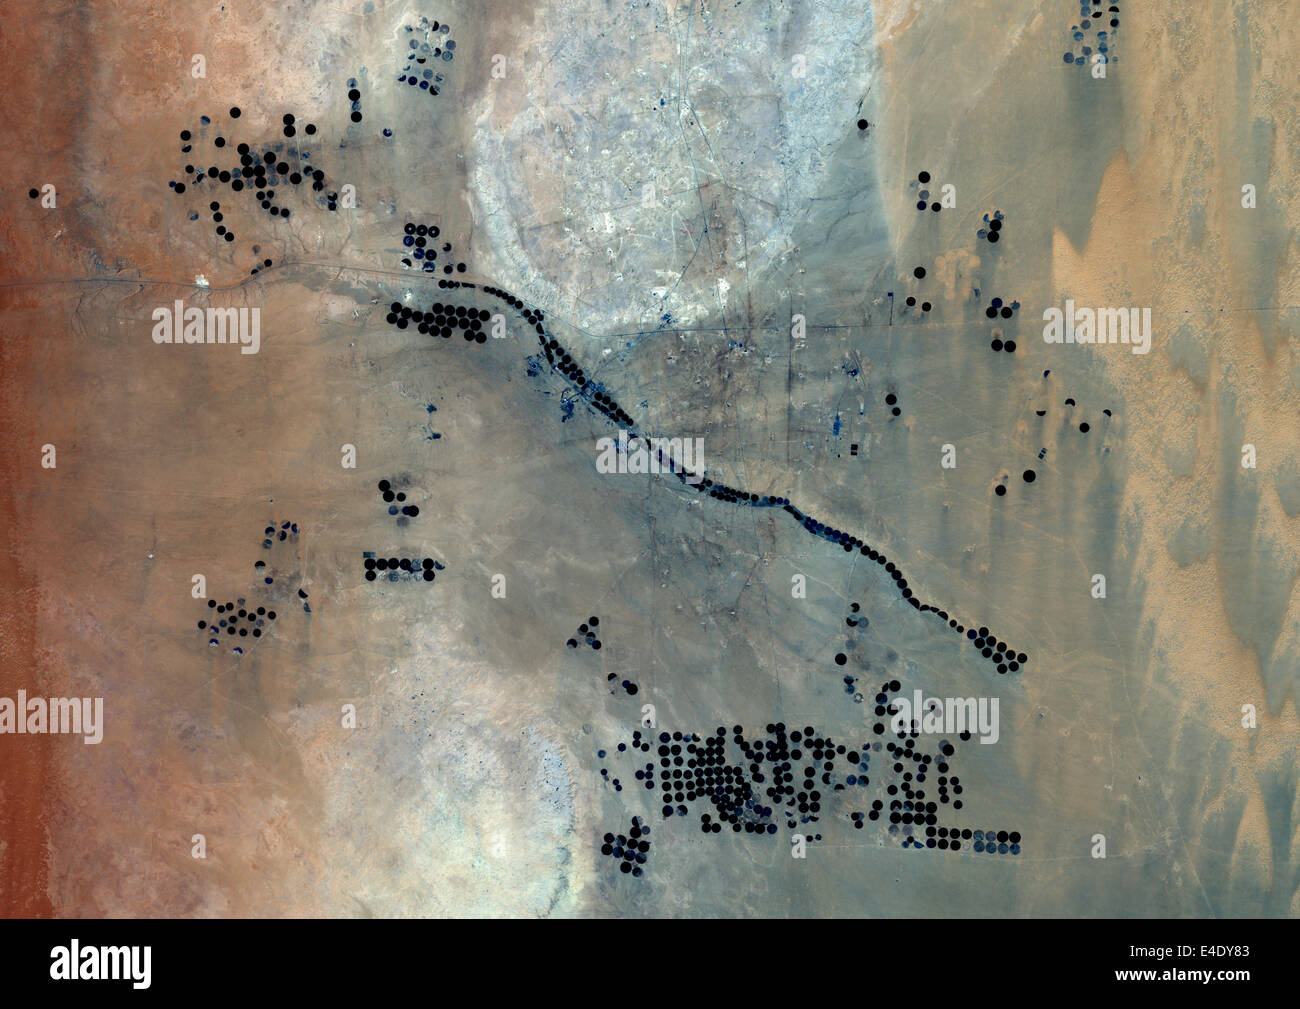 Agriculture In The Desert In 2006, Saudi Arabia, True Colour Satellite Image. True colour satellite image of agriculture in the Stock Photo